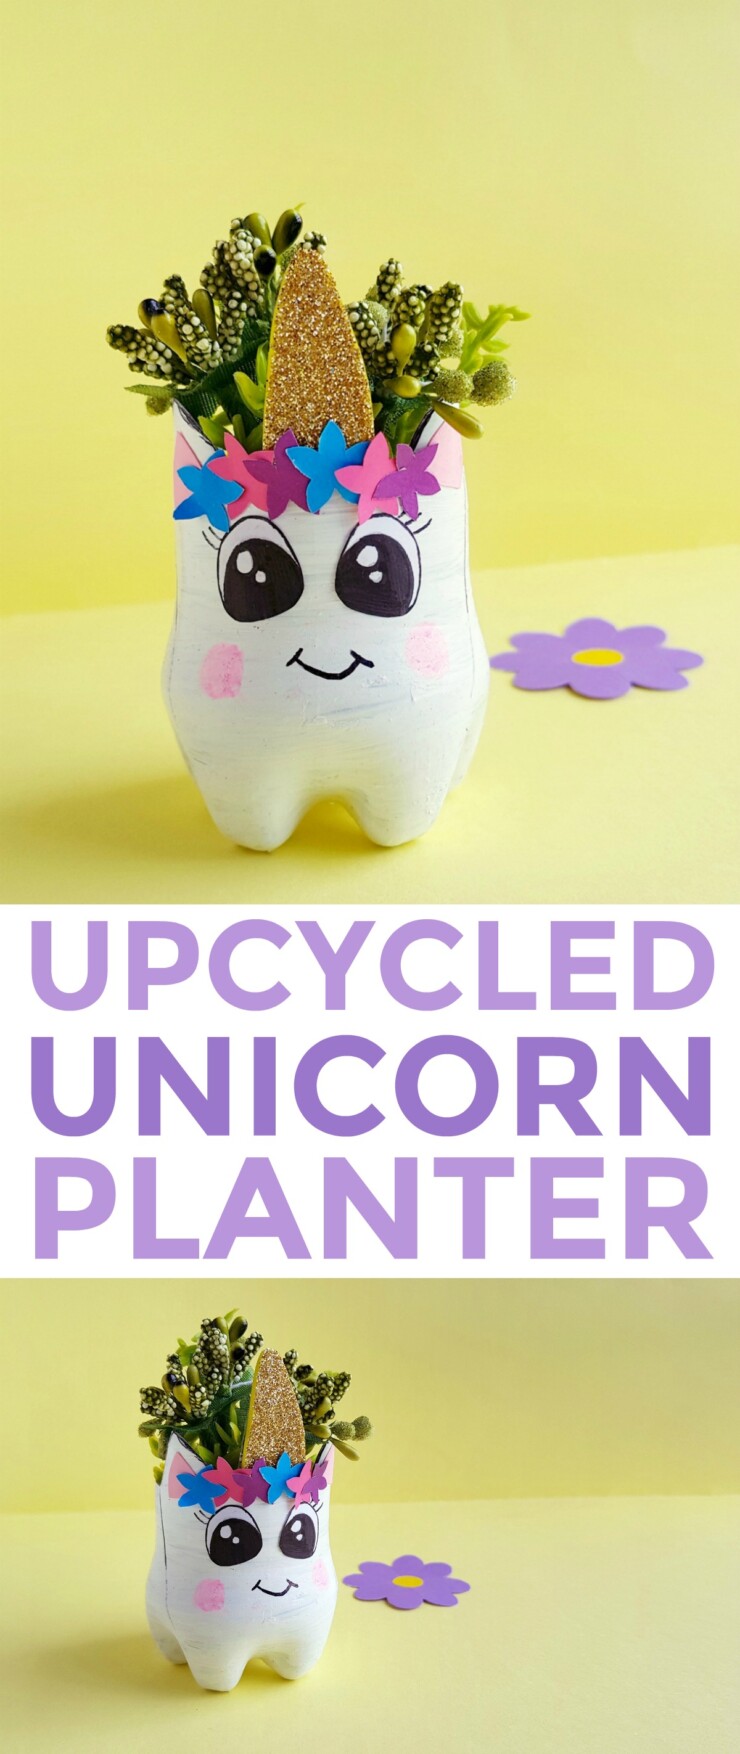 This Upcycled Unicorn Planter makes any space magical. This is a great bottle recycling craft for kids and adults alike!